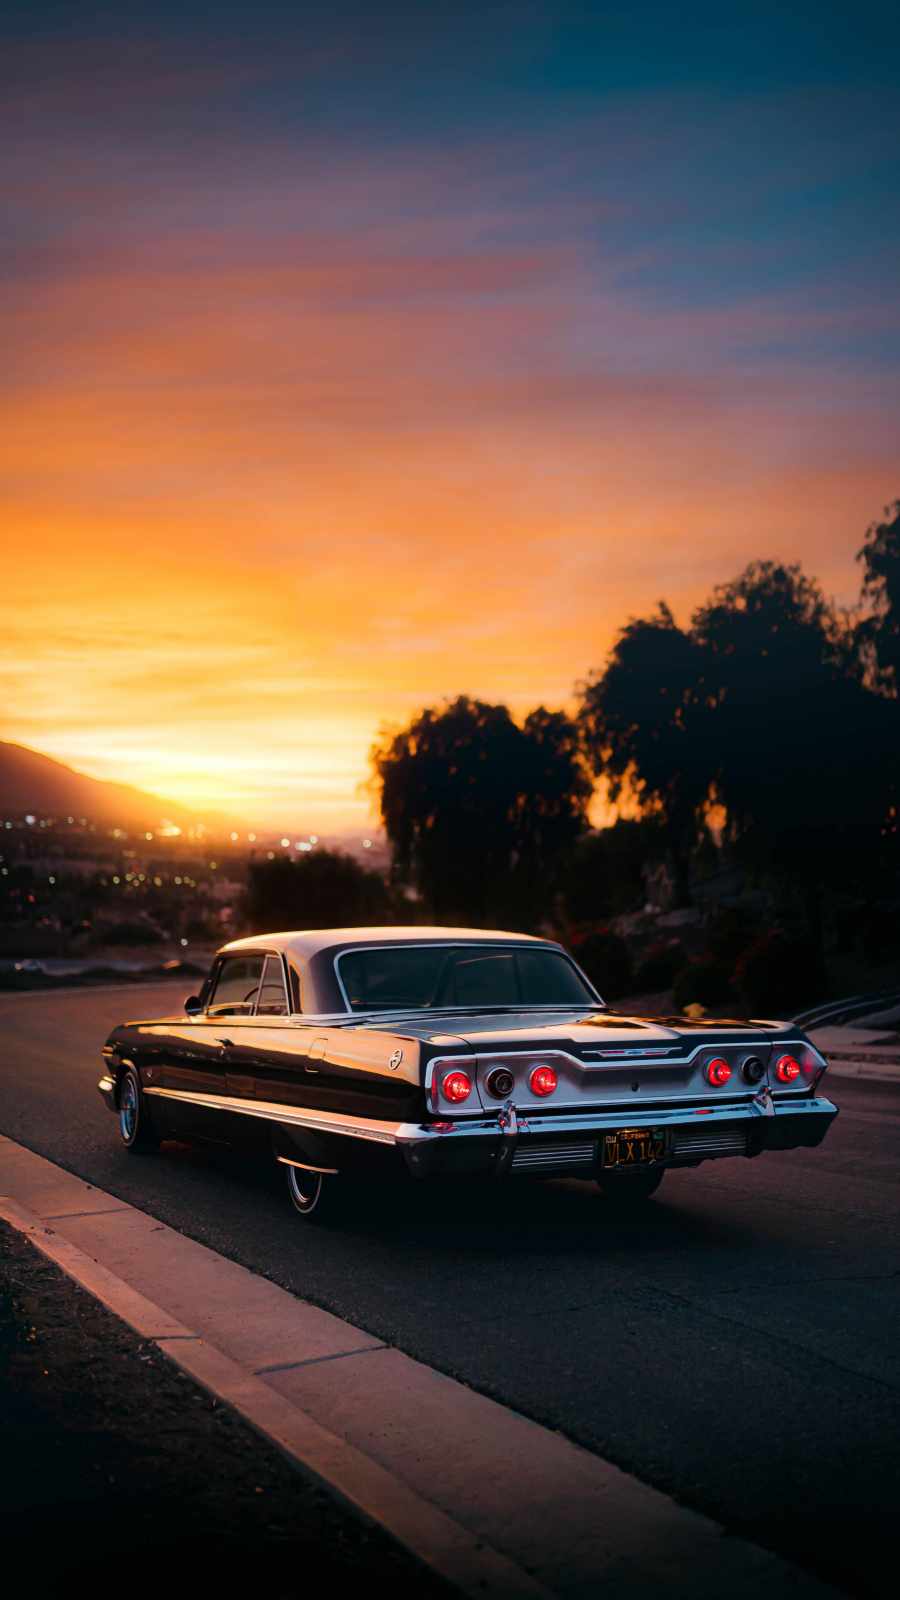 Low Rider Classic Car - IPhone Wallpapers : iPhone Wallpapers